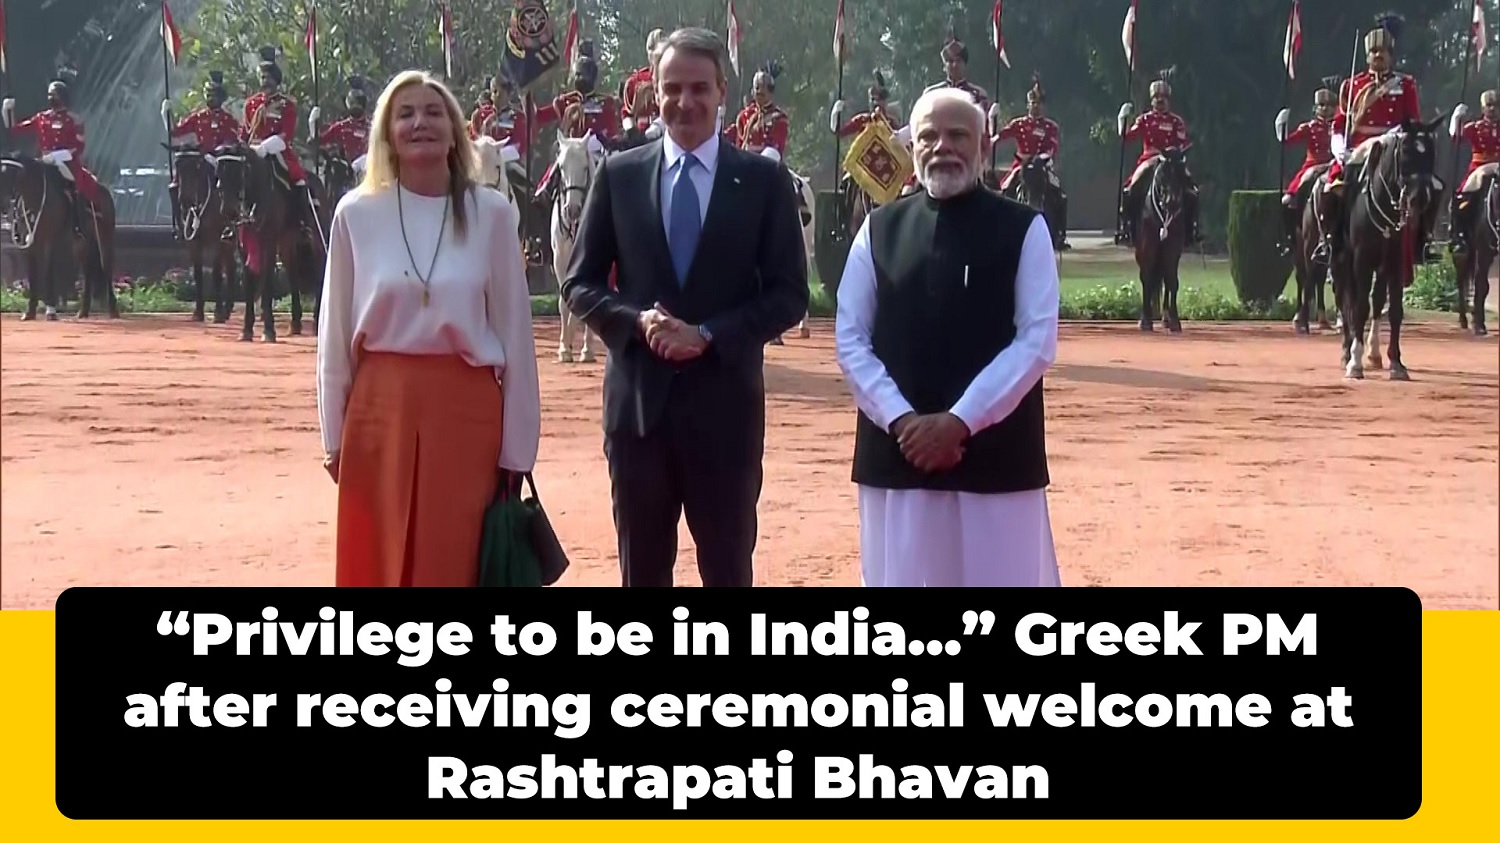 ``Privilege to be in India`` Greek PM after receiving ceremonial welcome at Rashtrapati Bhavan